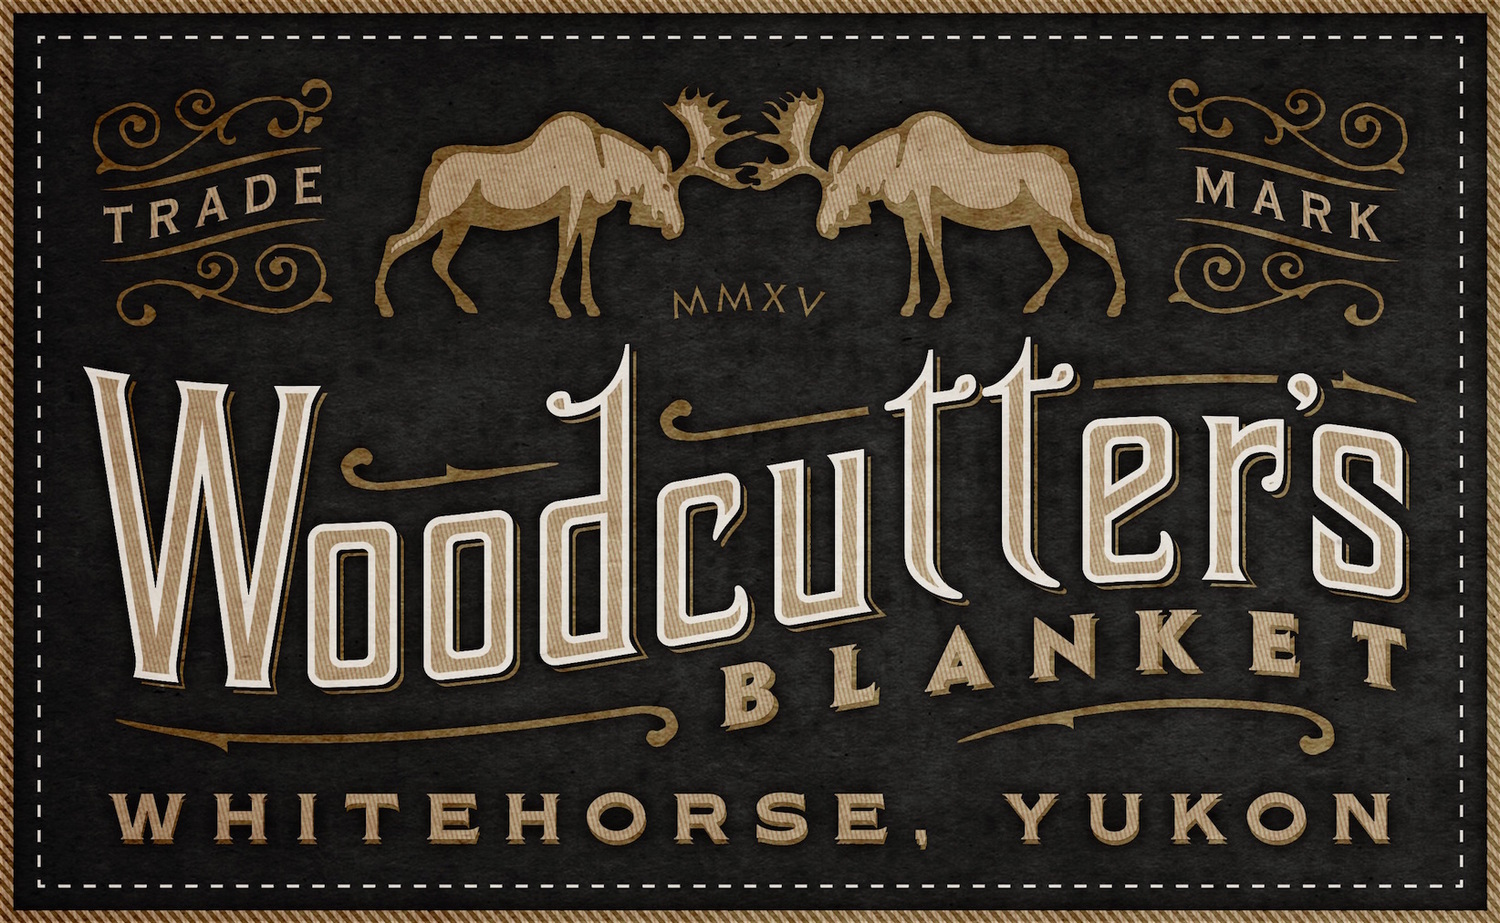 Woodcutter's Blanket /Brewery